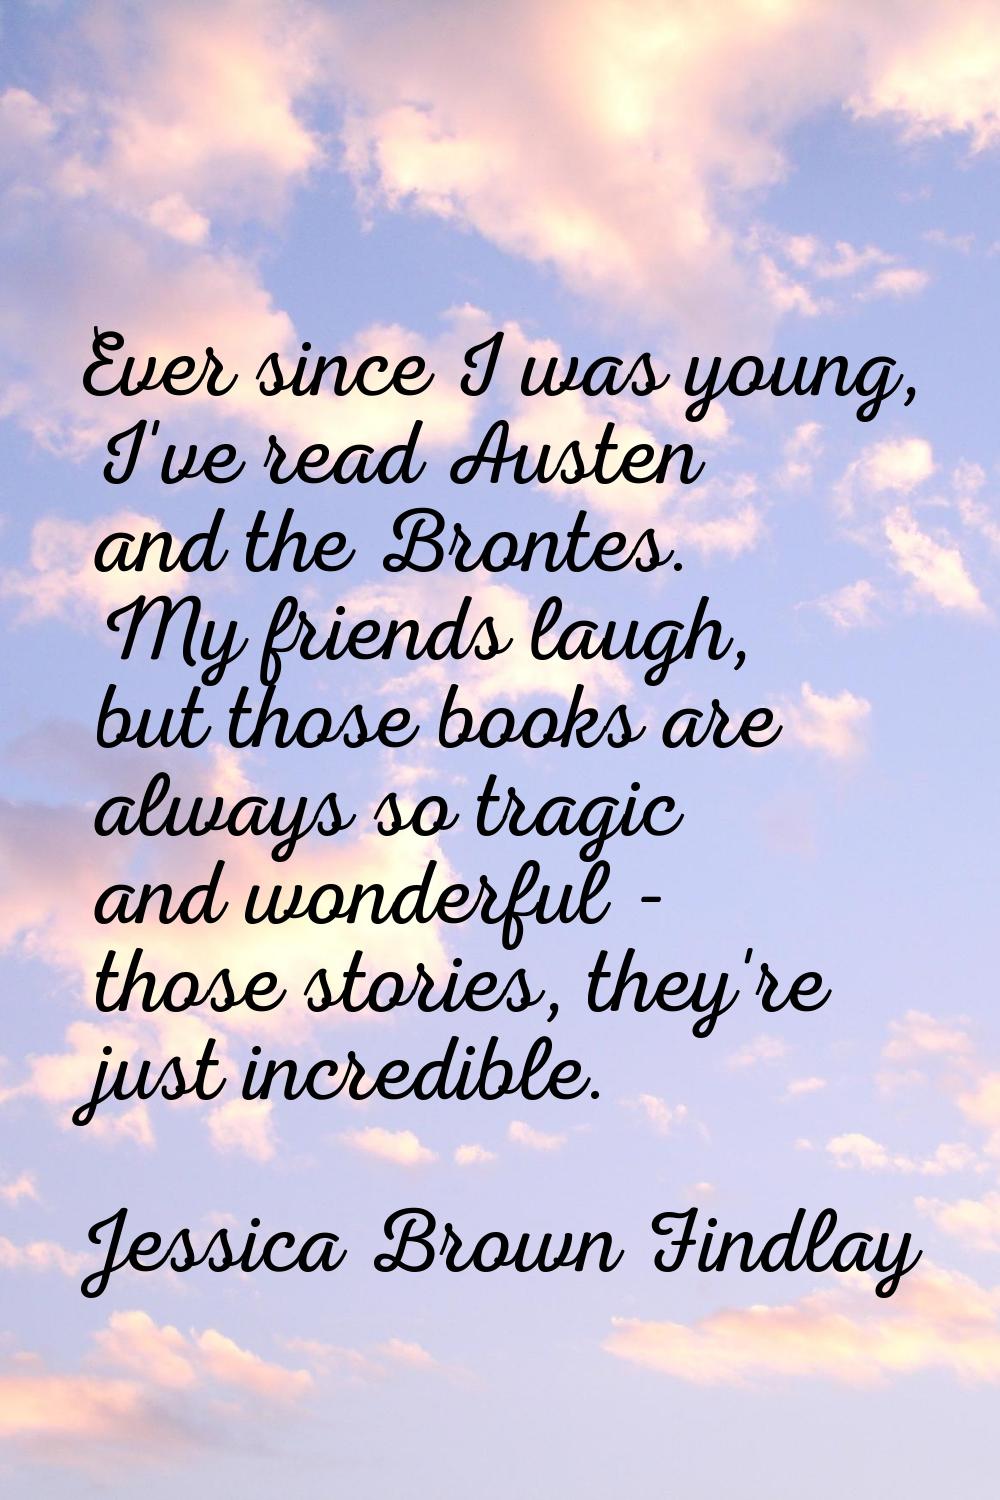 Ever since I was young, I've read Austen and the Brontes. My friends laugh, but those books are alw